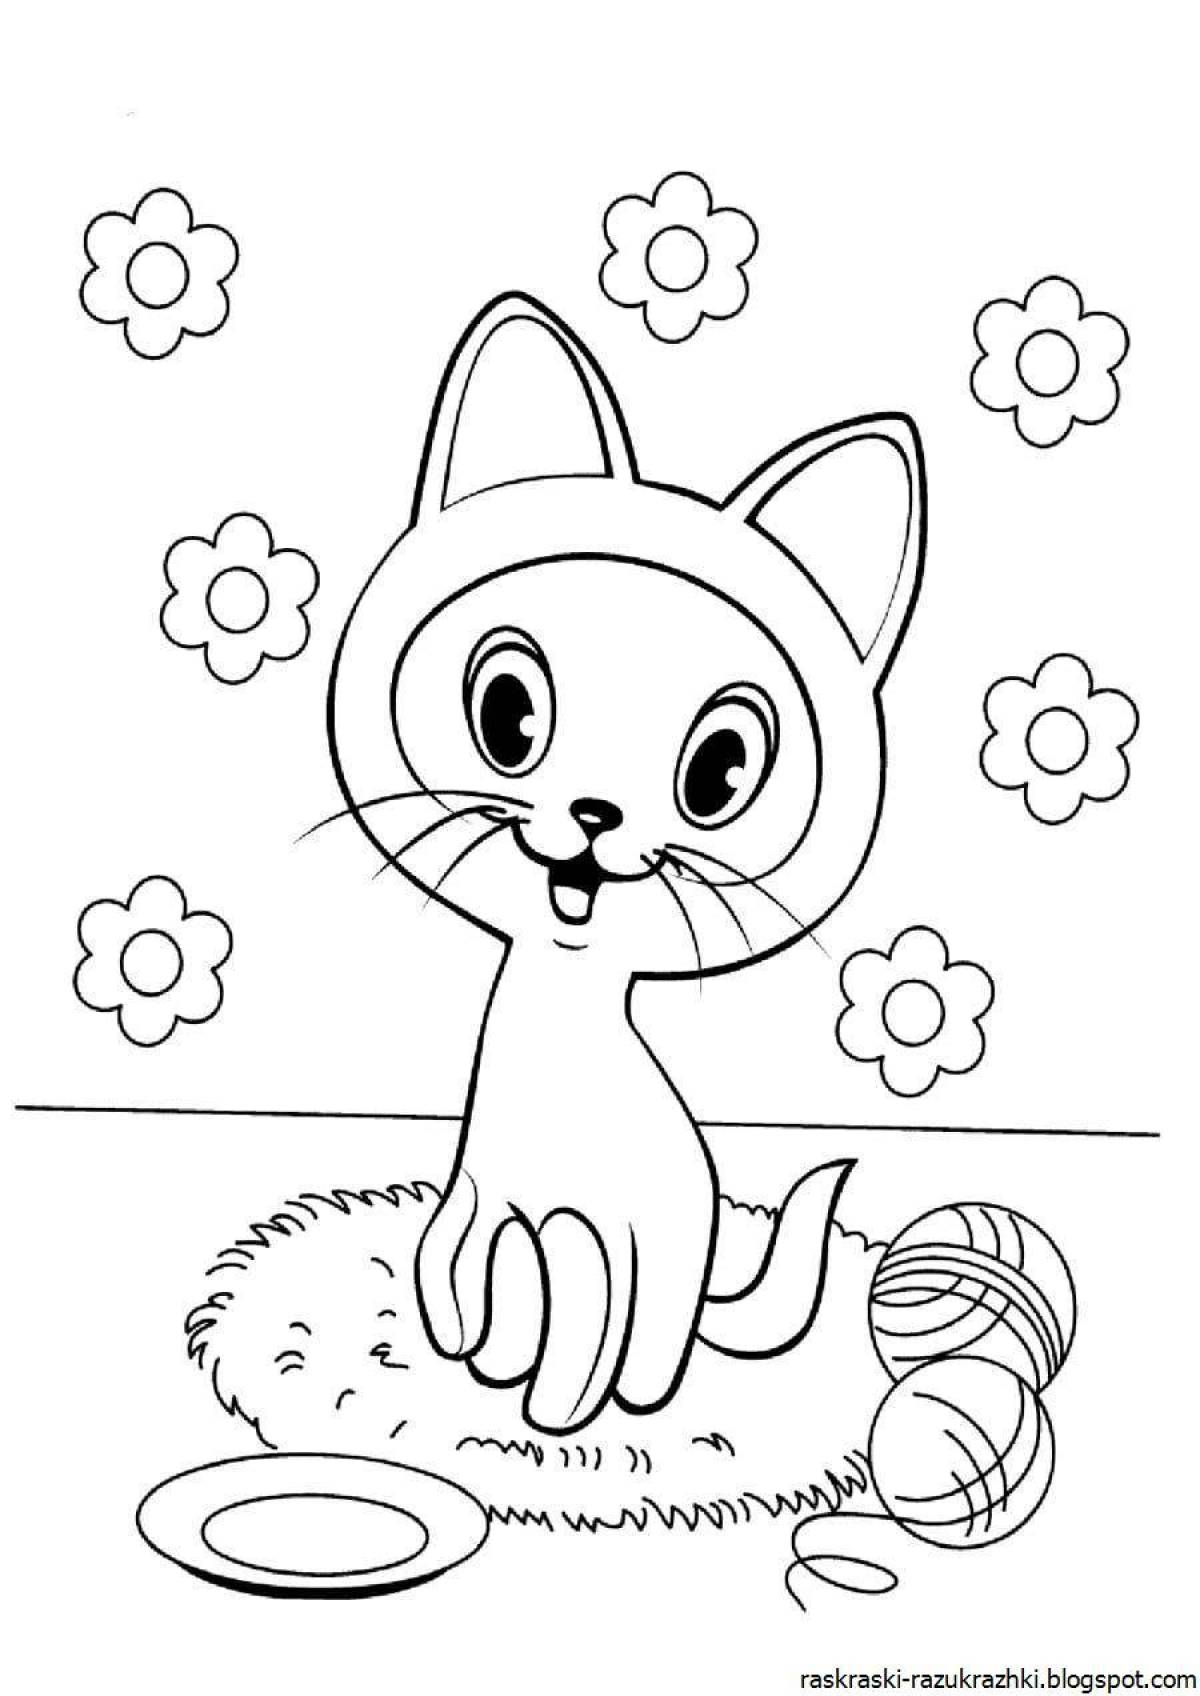 Joyful cats coloring pages for kids